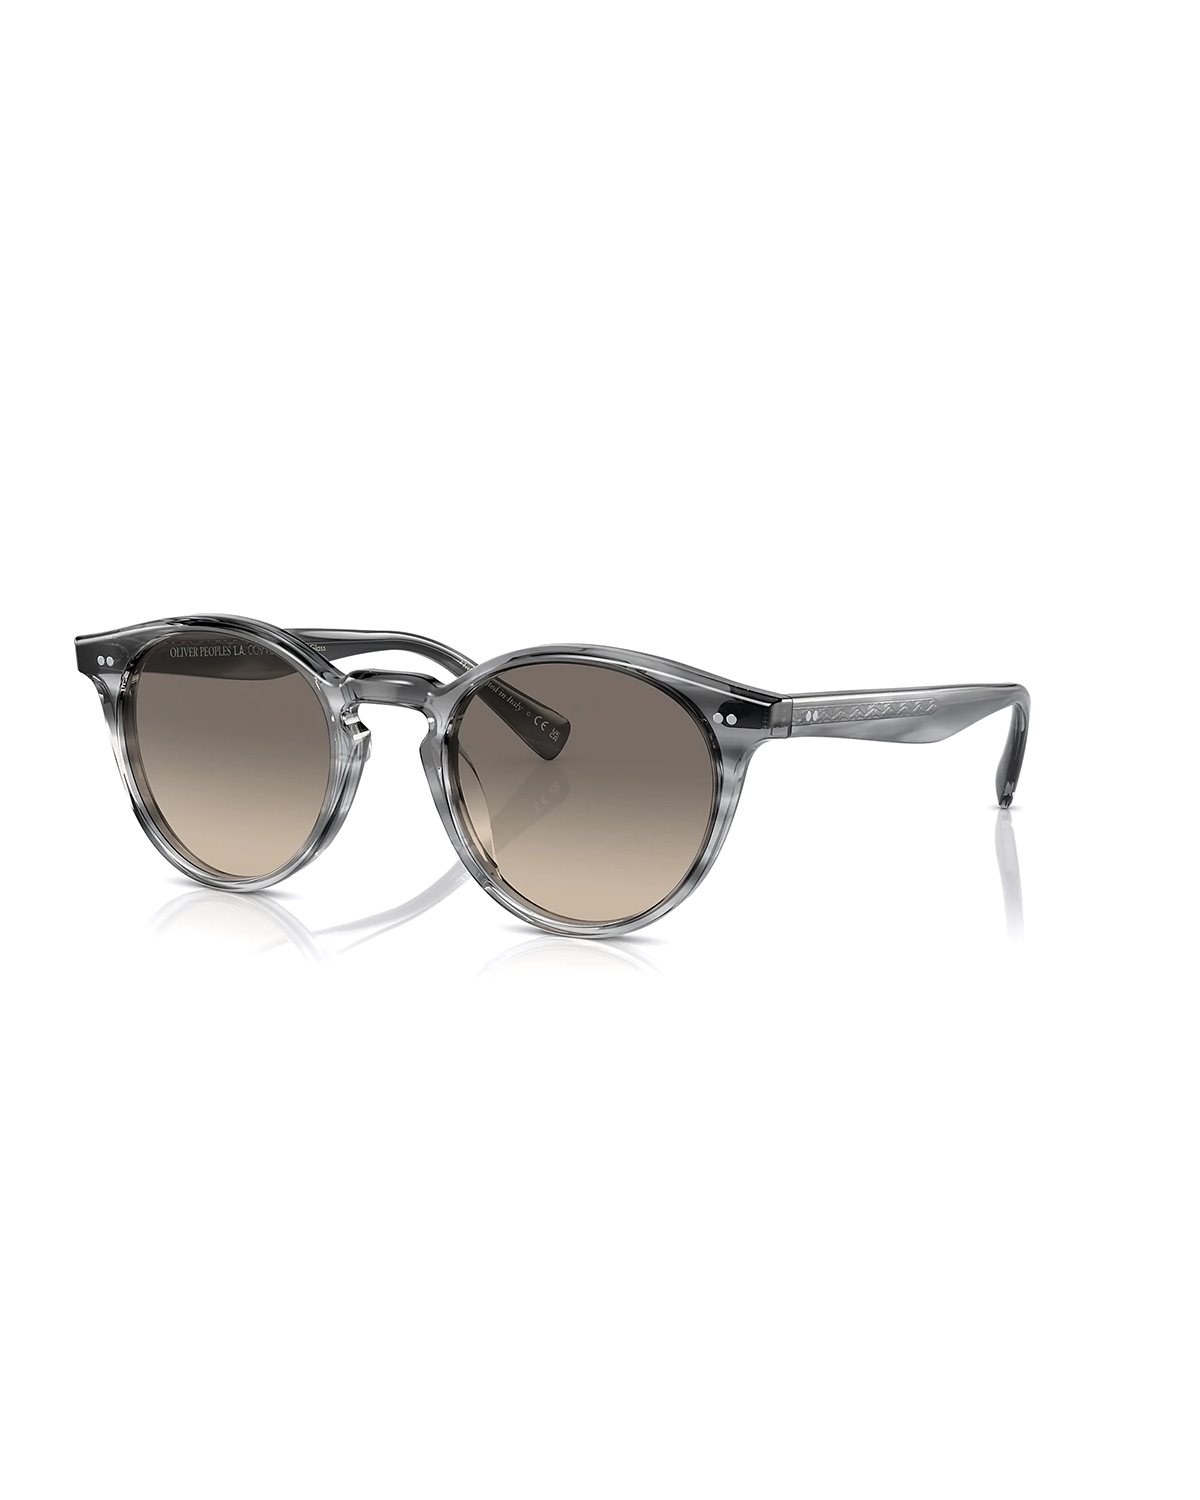 Romare Sun Grey Textured Tortoise With Shale Gradient Lens